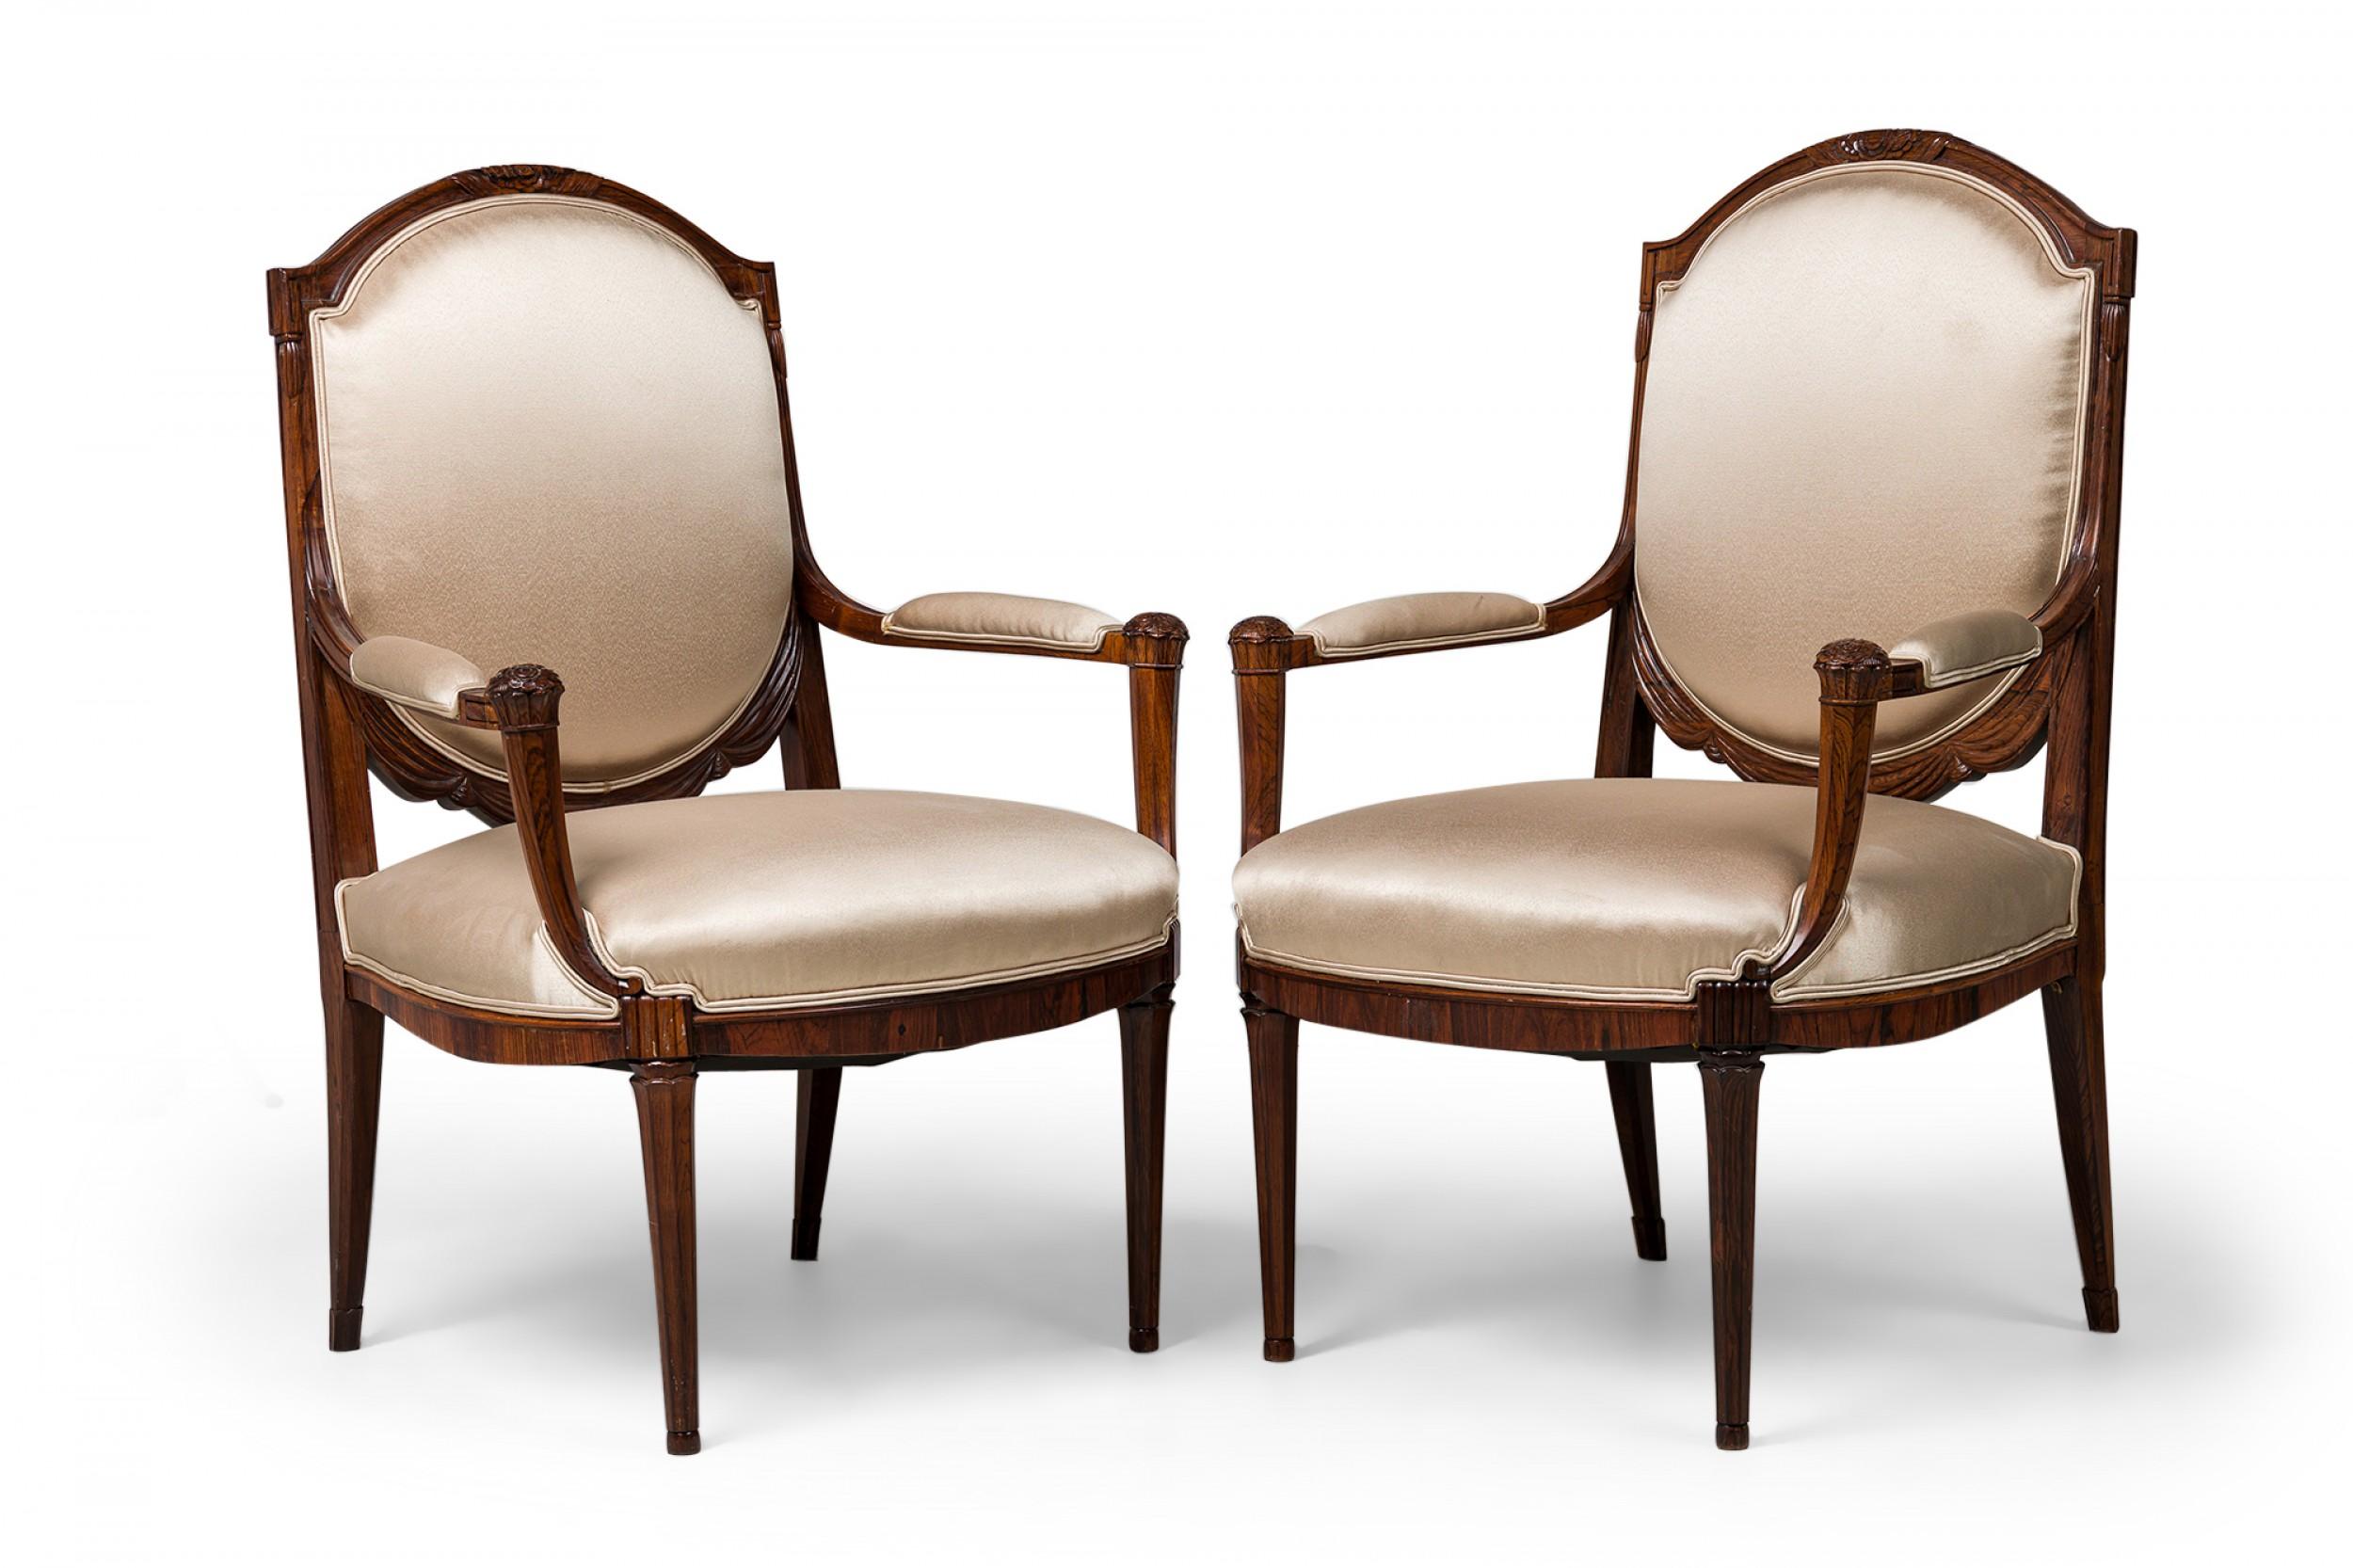 Pair of Late Art Deco French mahogany armchairs featuring an oval back in a carved arch foliate design with drapery and rosettes at the arms\' corners, upholstered in a beige sateen fabric with double piping, standing on 4 molded legs, the back two